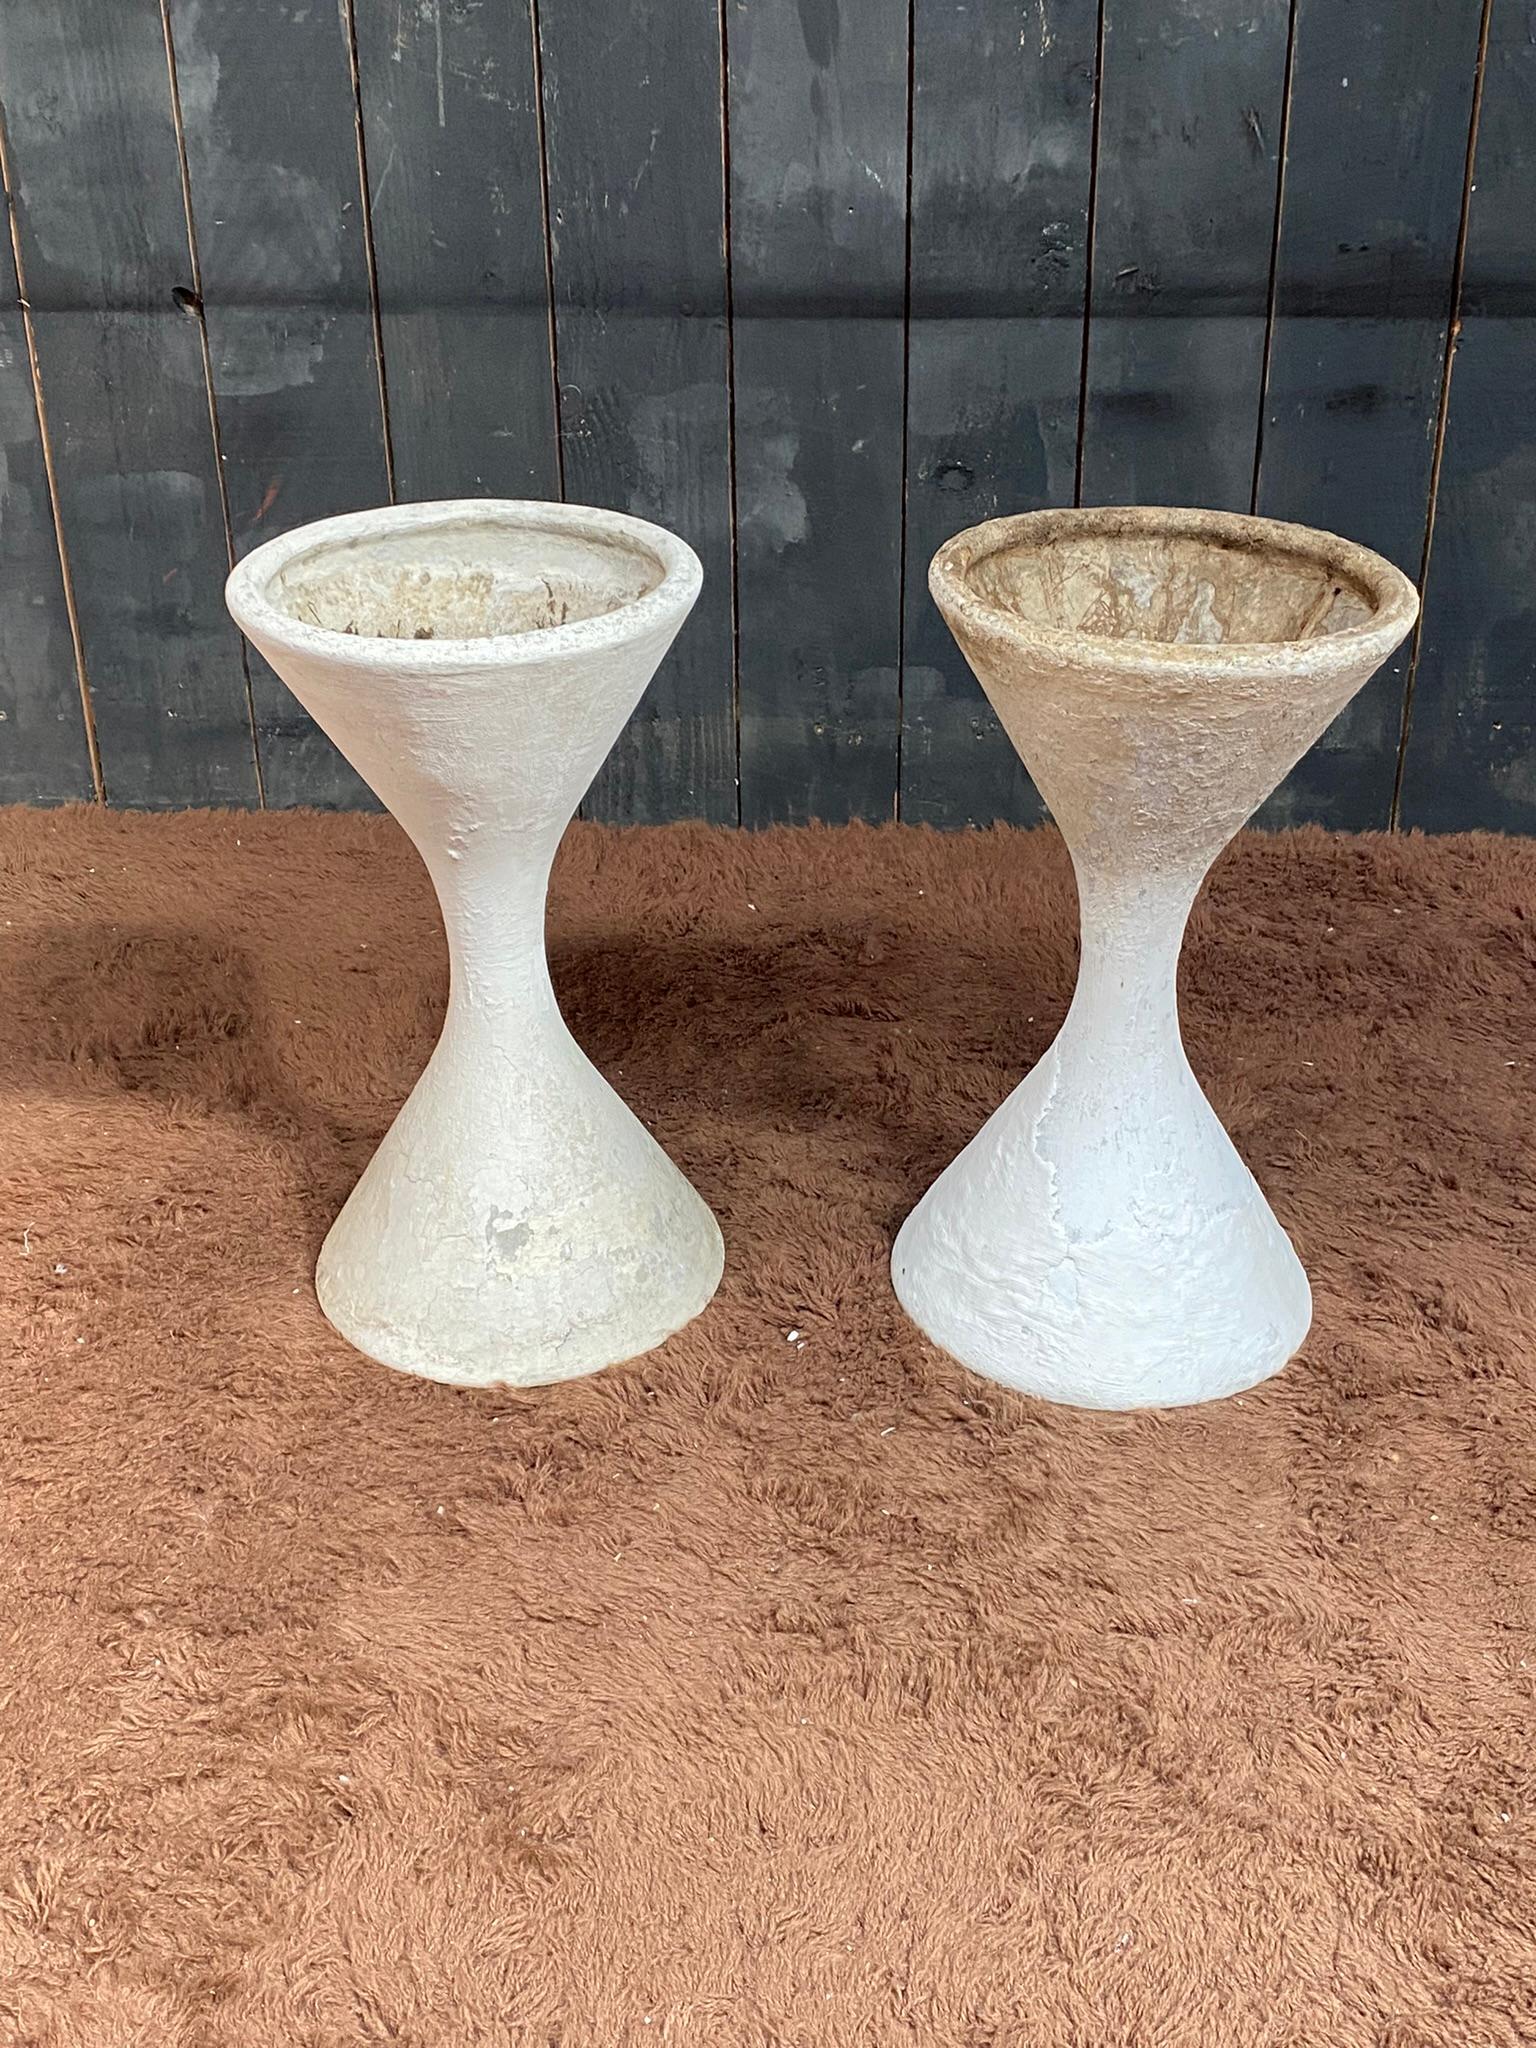 2 Small spindle or diabolo planter designed by Swiss architect Willy Guhl
The price is for one
Two are available.